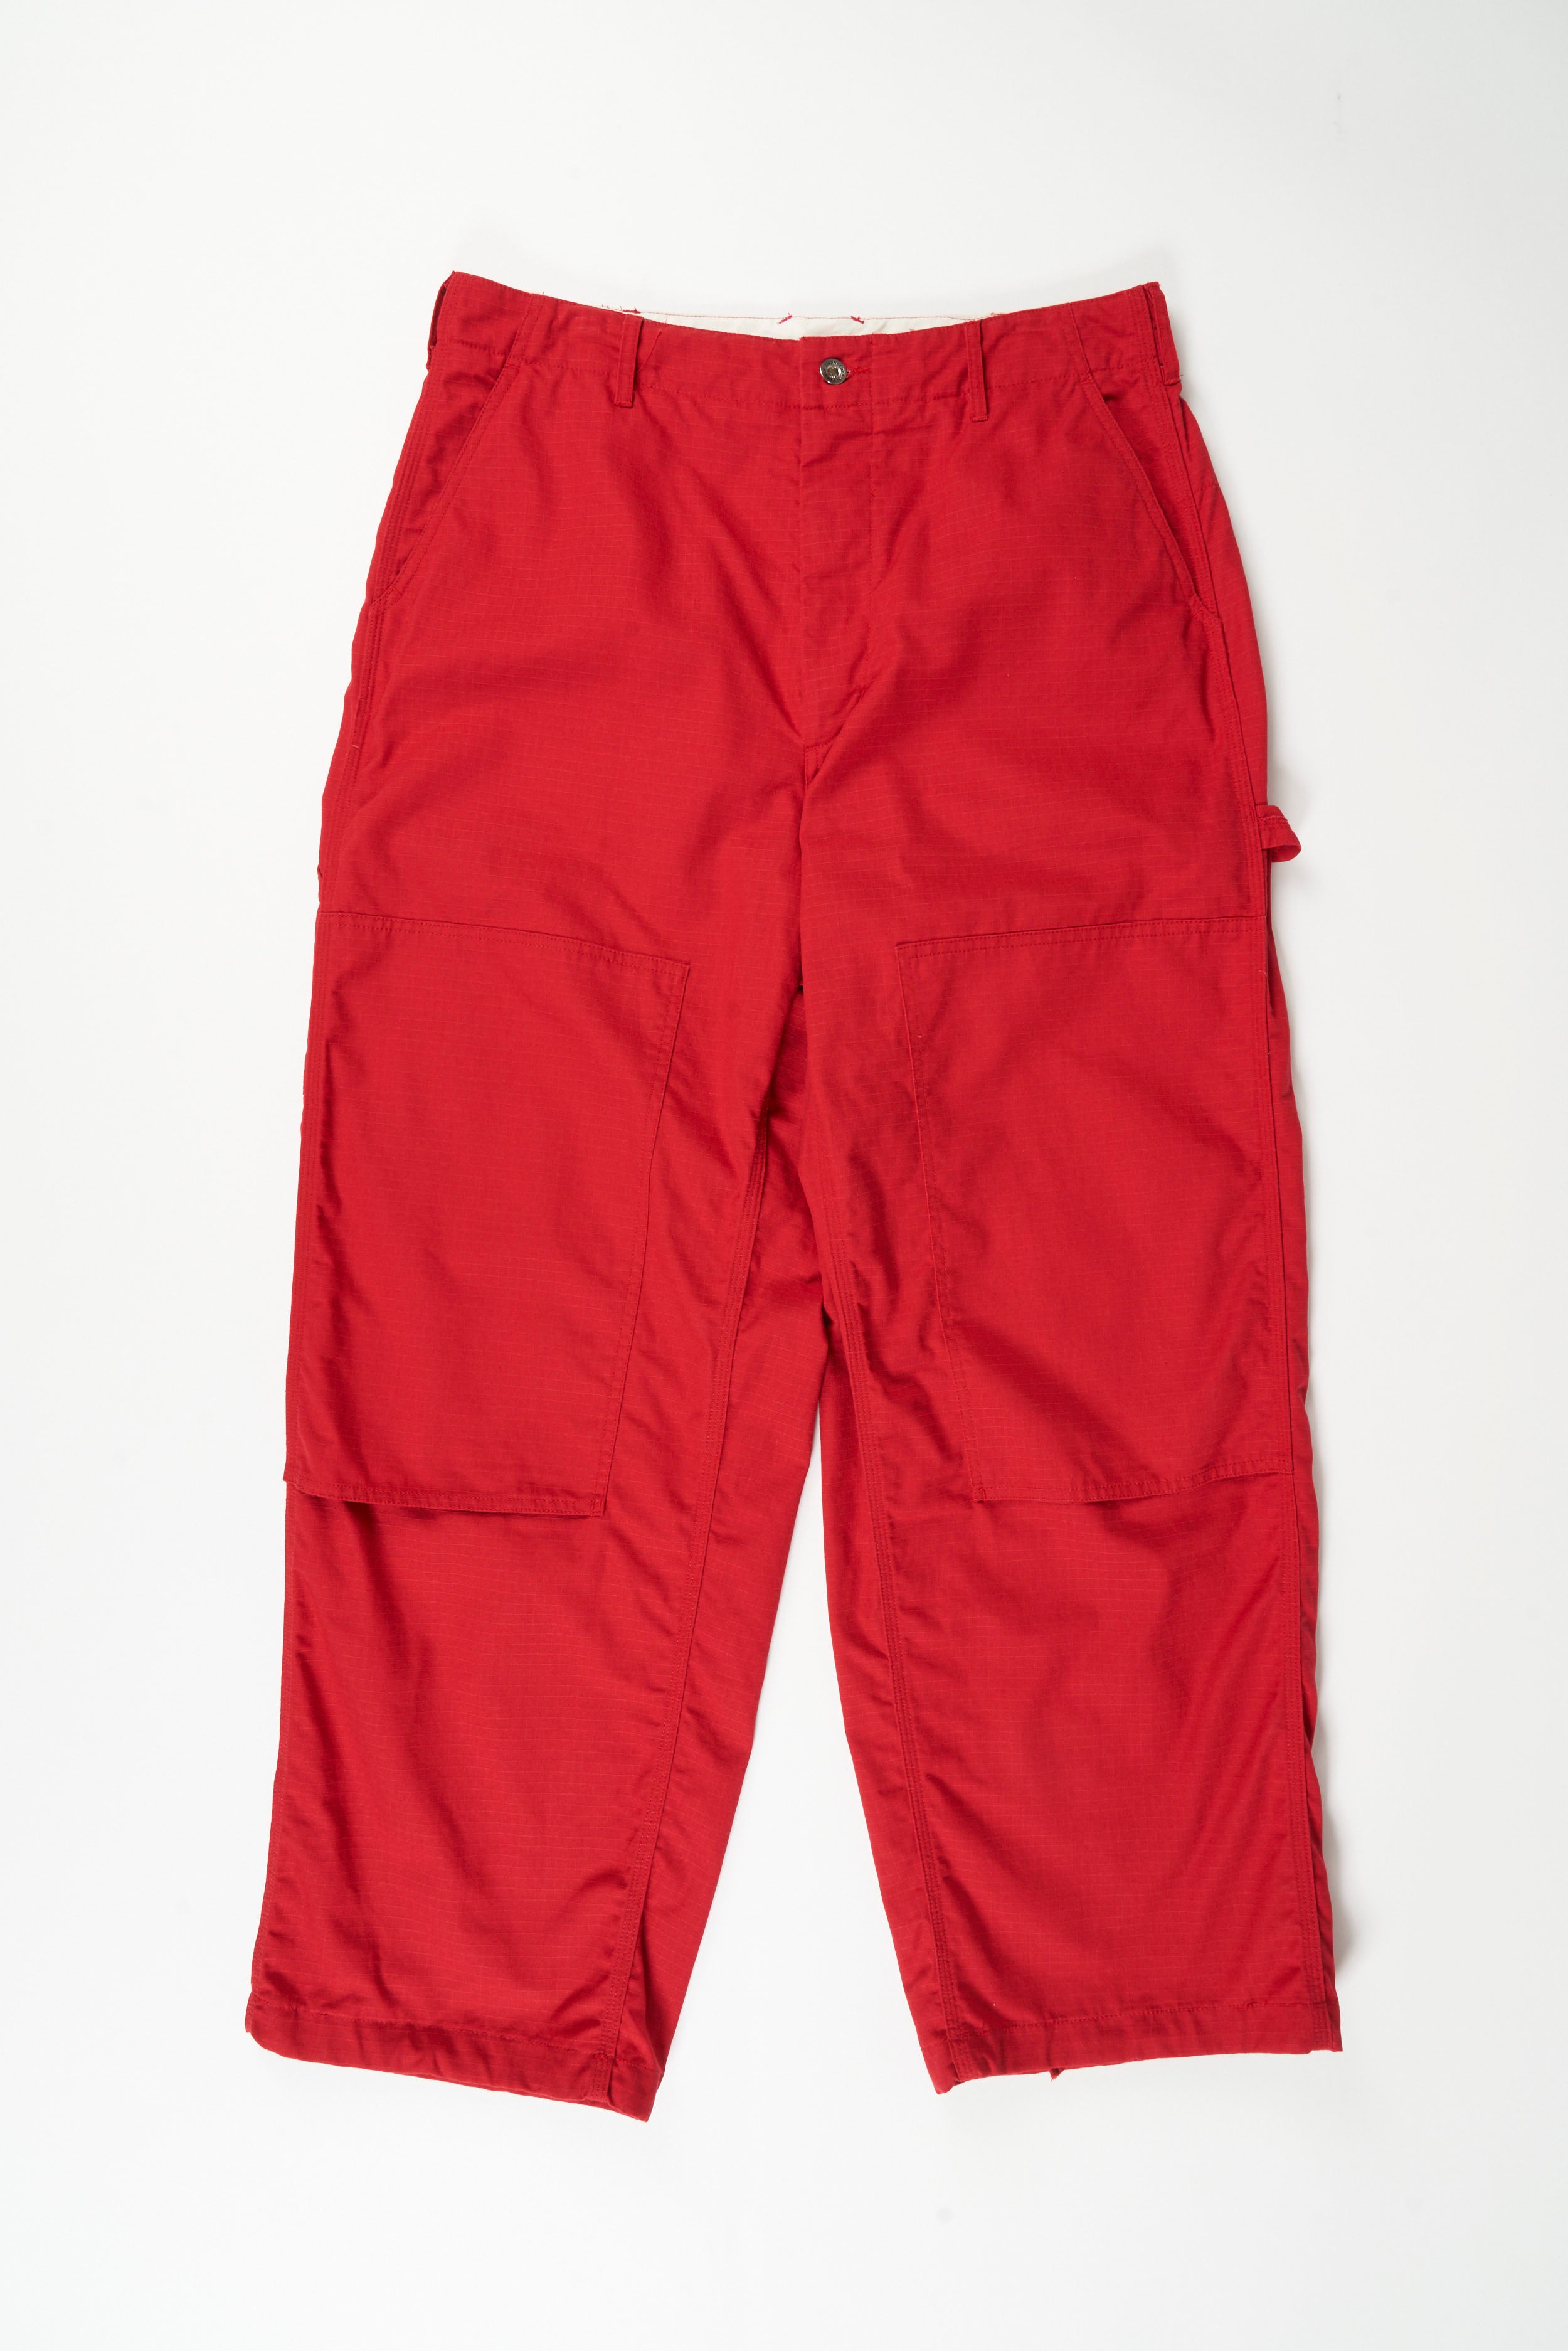 Painter Pant - Red Cotton Ripstop